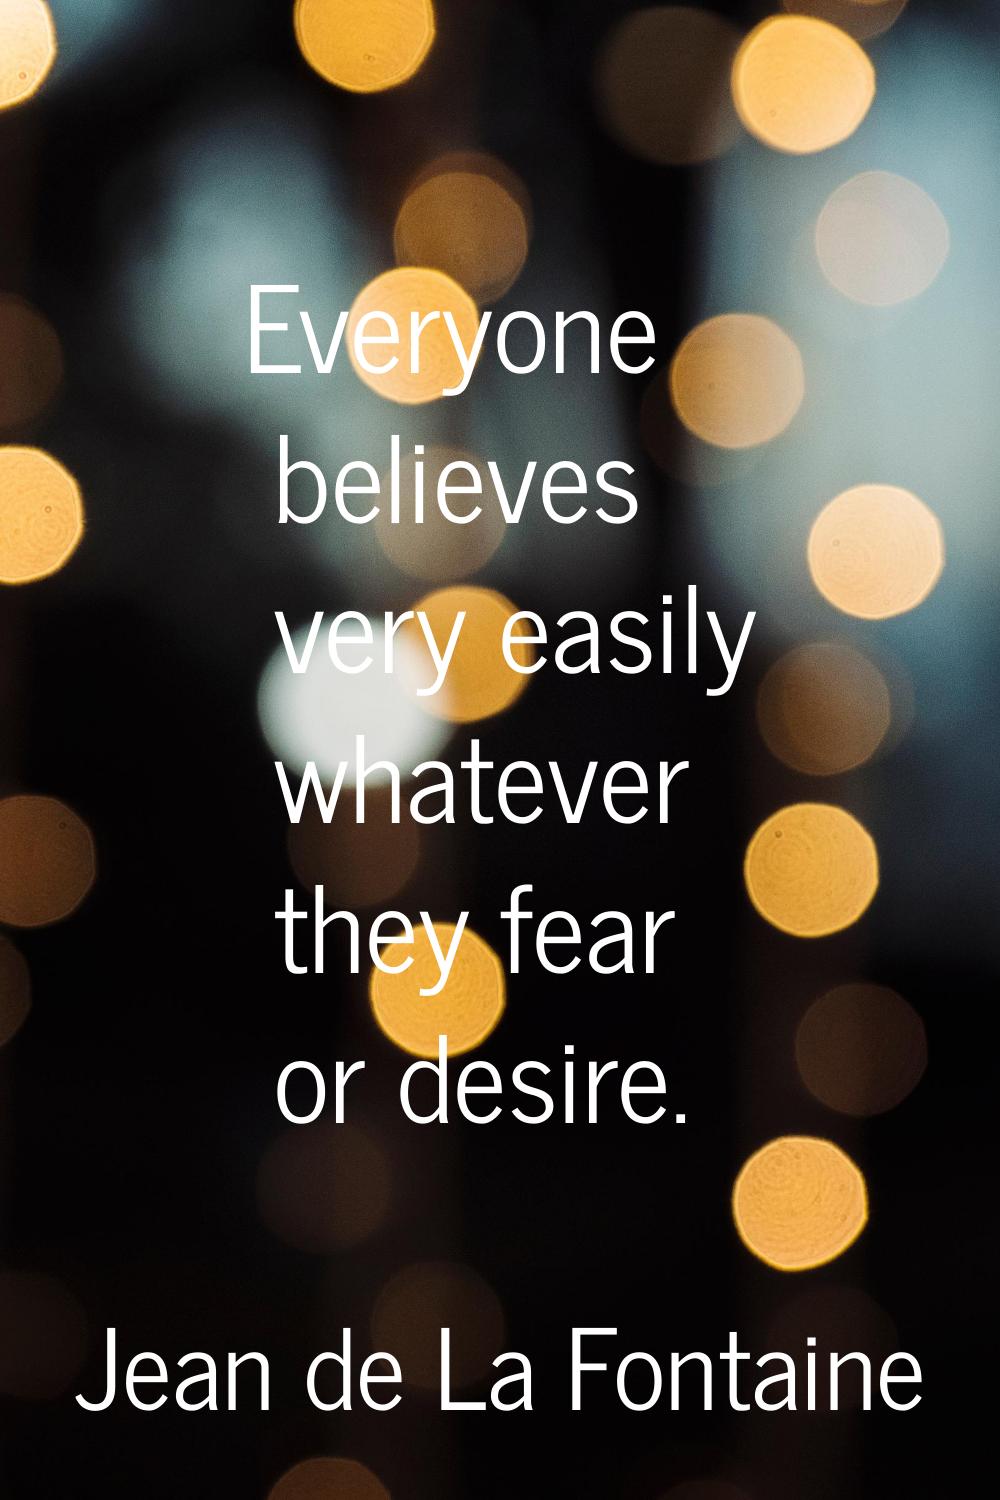 Everyone believes very easily whatever they fear or desire.